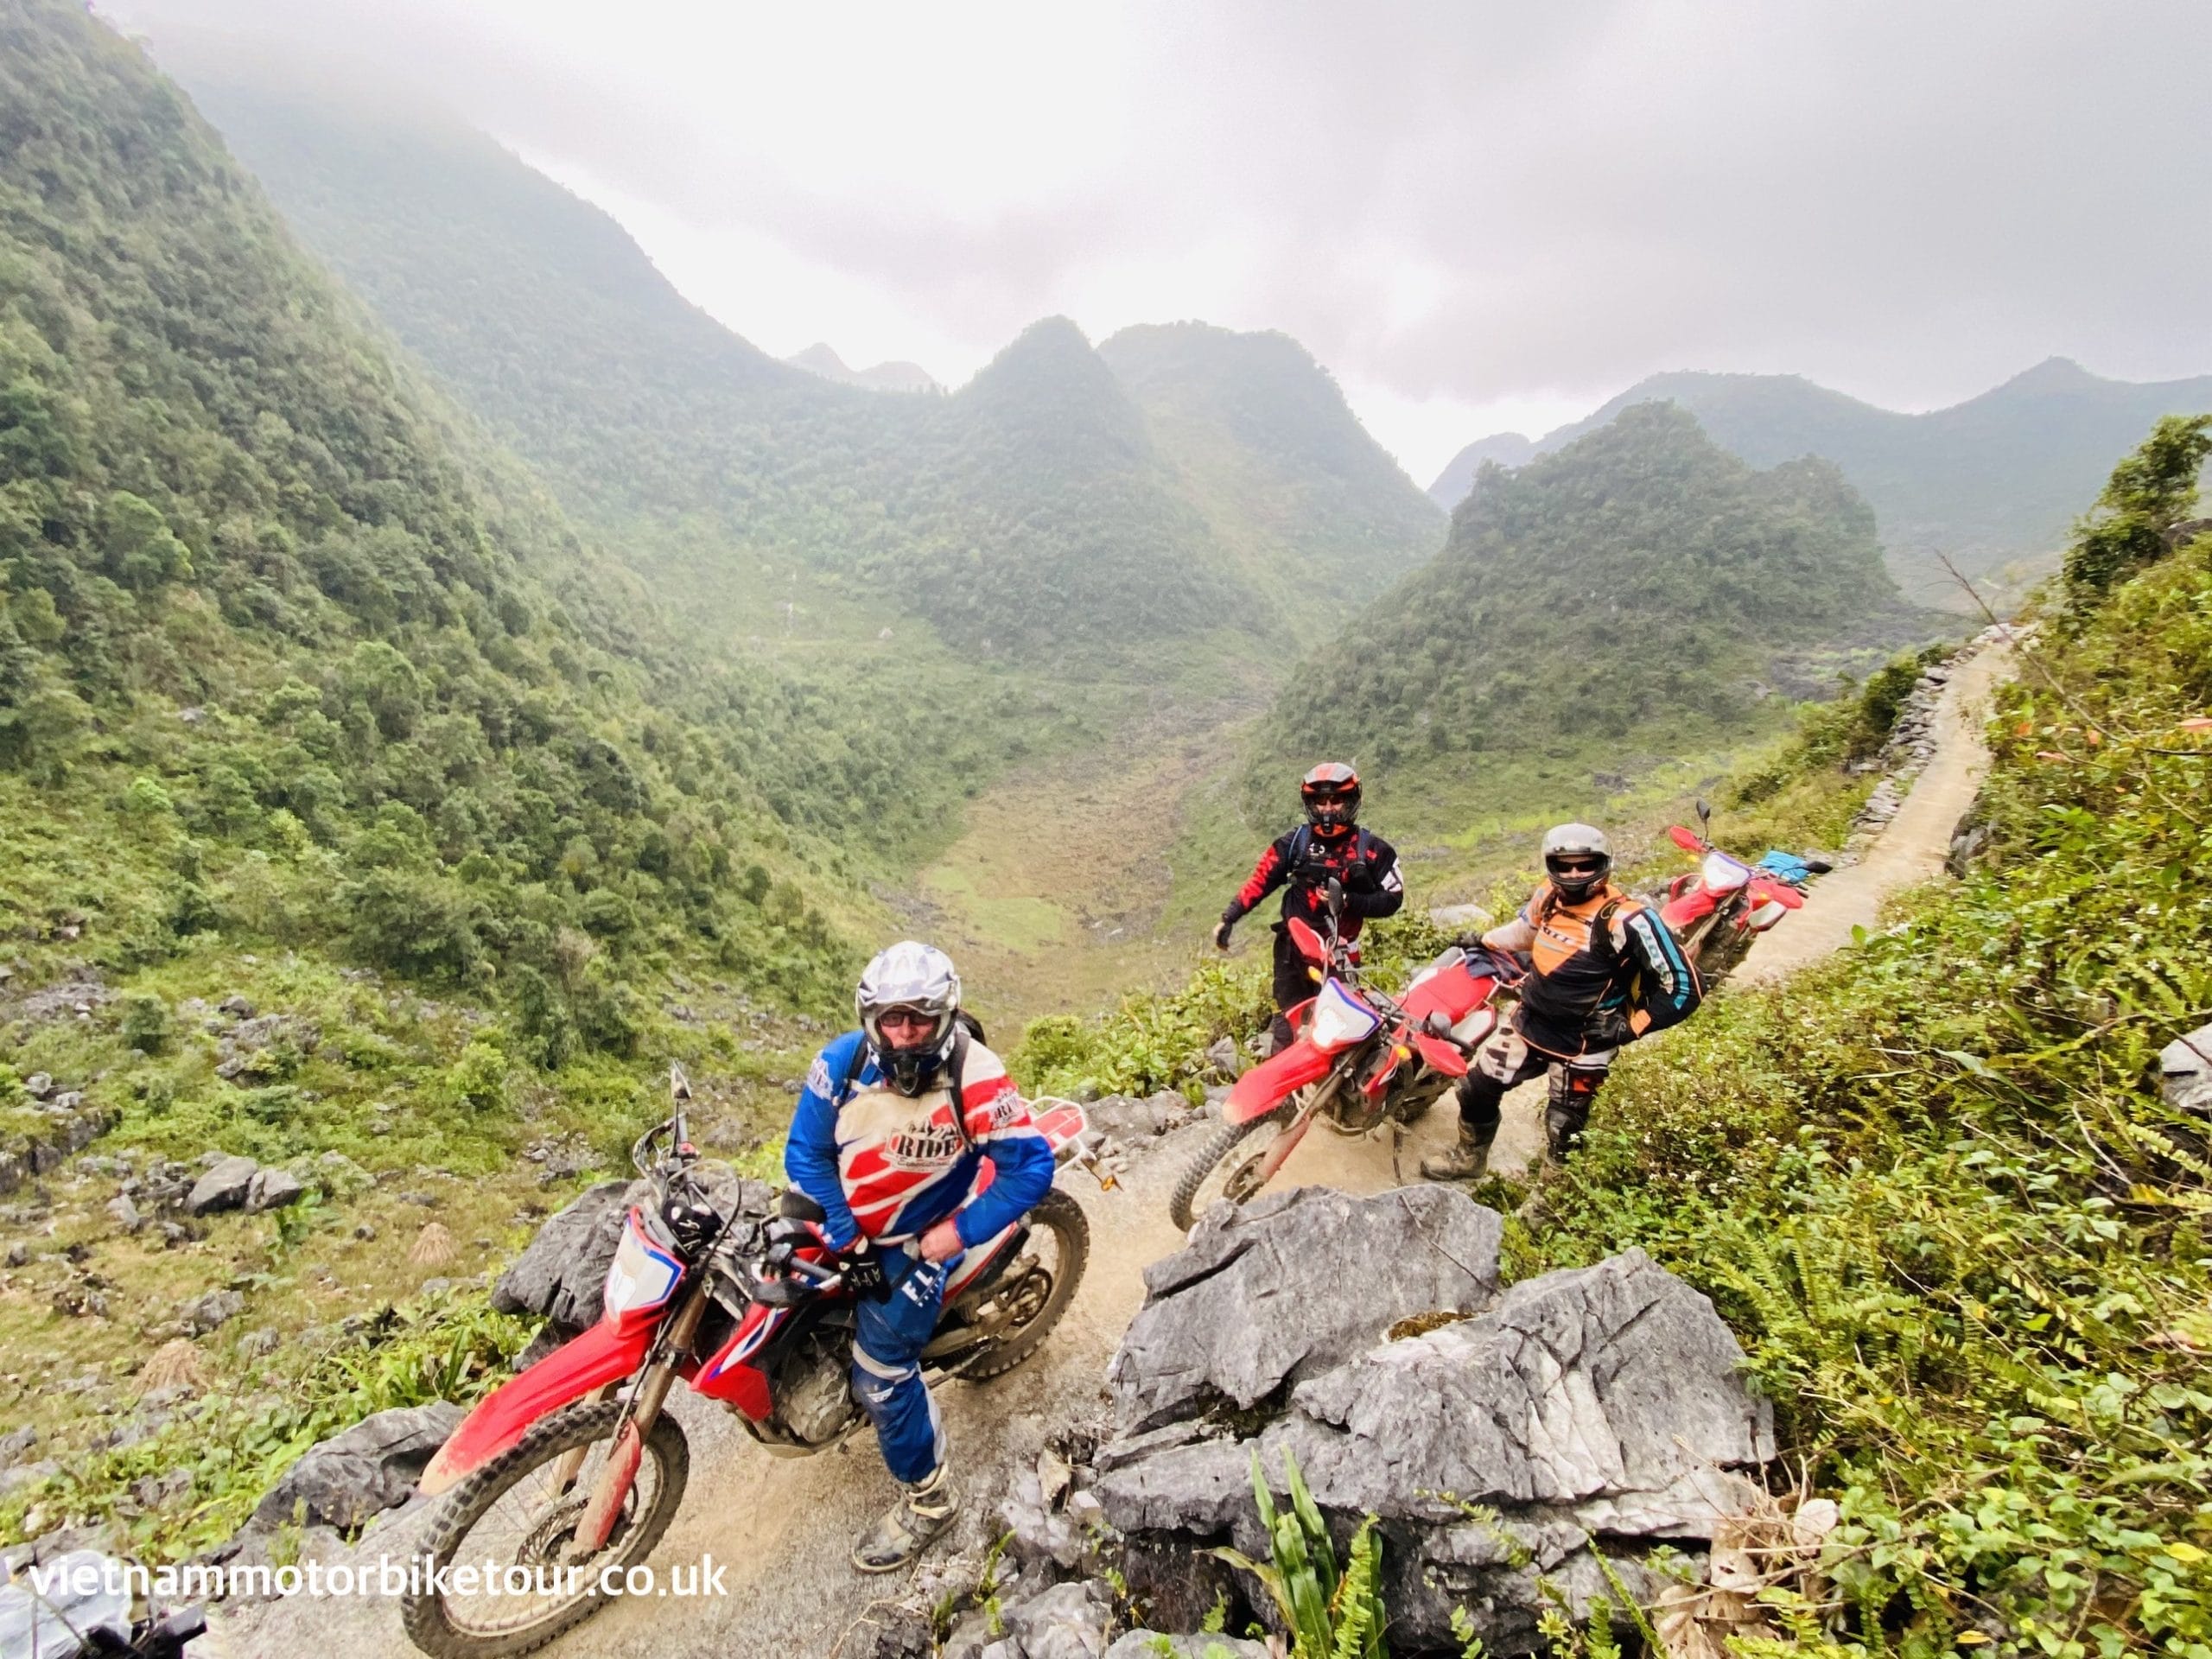 hagiang loop motorbike tours to dong van 8 scaled - What To See in Ma Pi Leng pass While Riding Motorcycles?